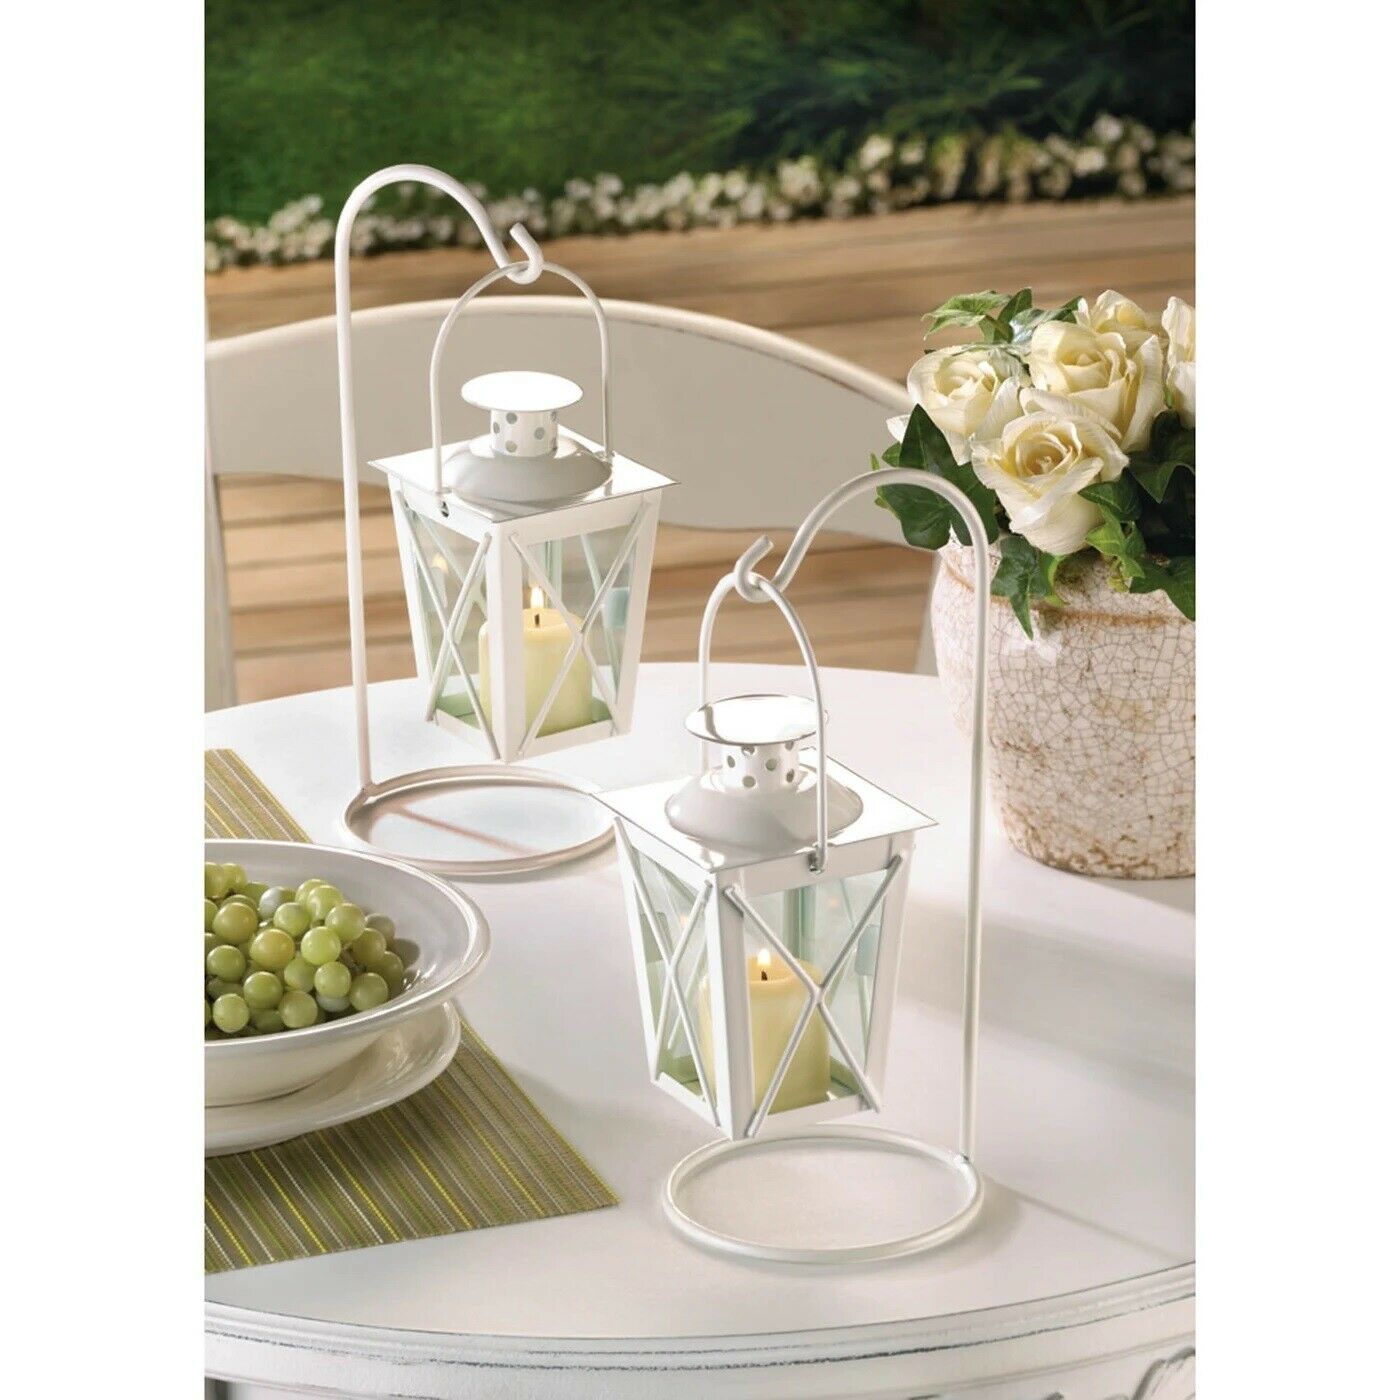 Pair Small White Candle Holder Lantern Wedding Centerpiece Stand Lamp Home Decor